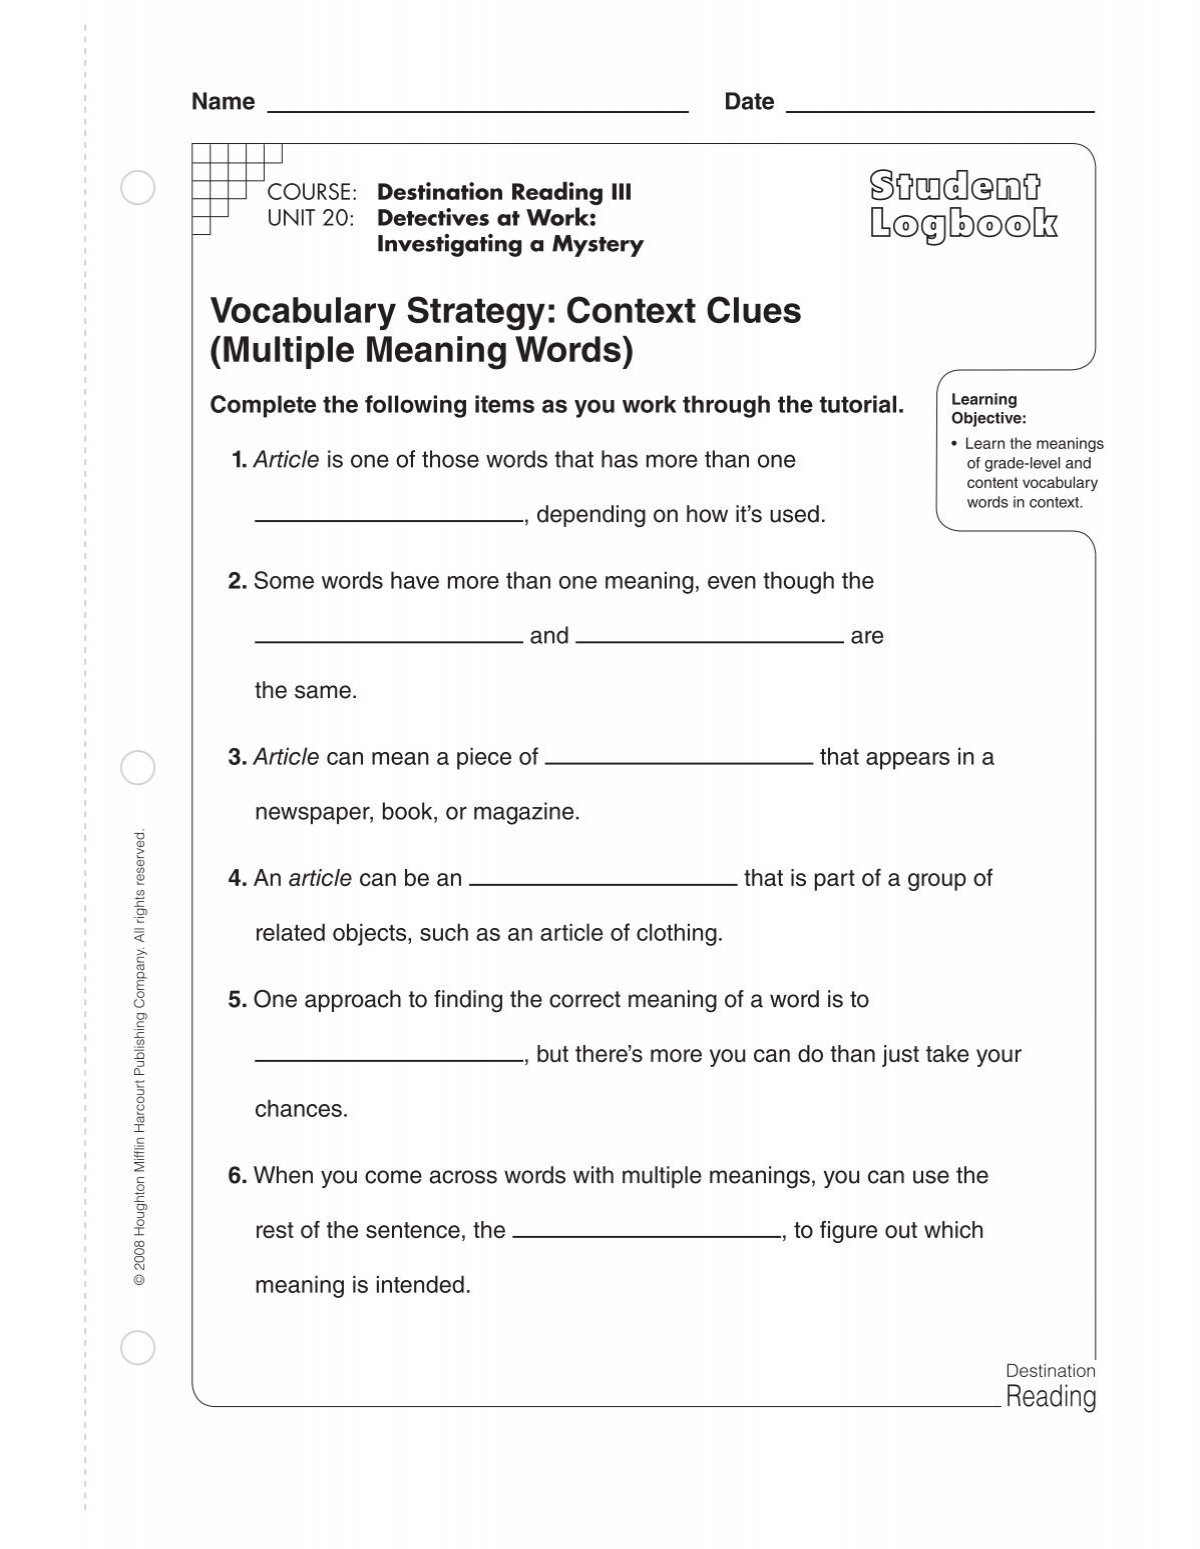 Vocabulary Strategy Context Clues Multiple Meaning Words